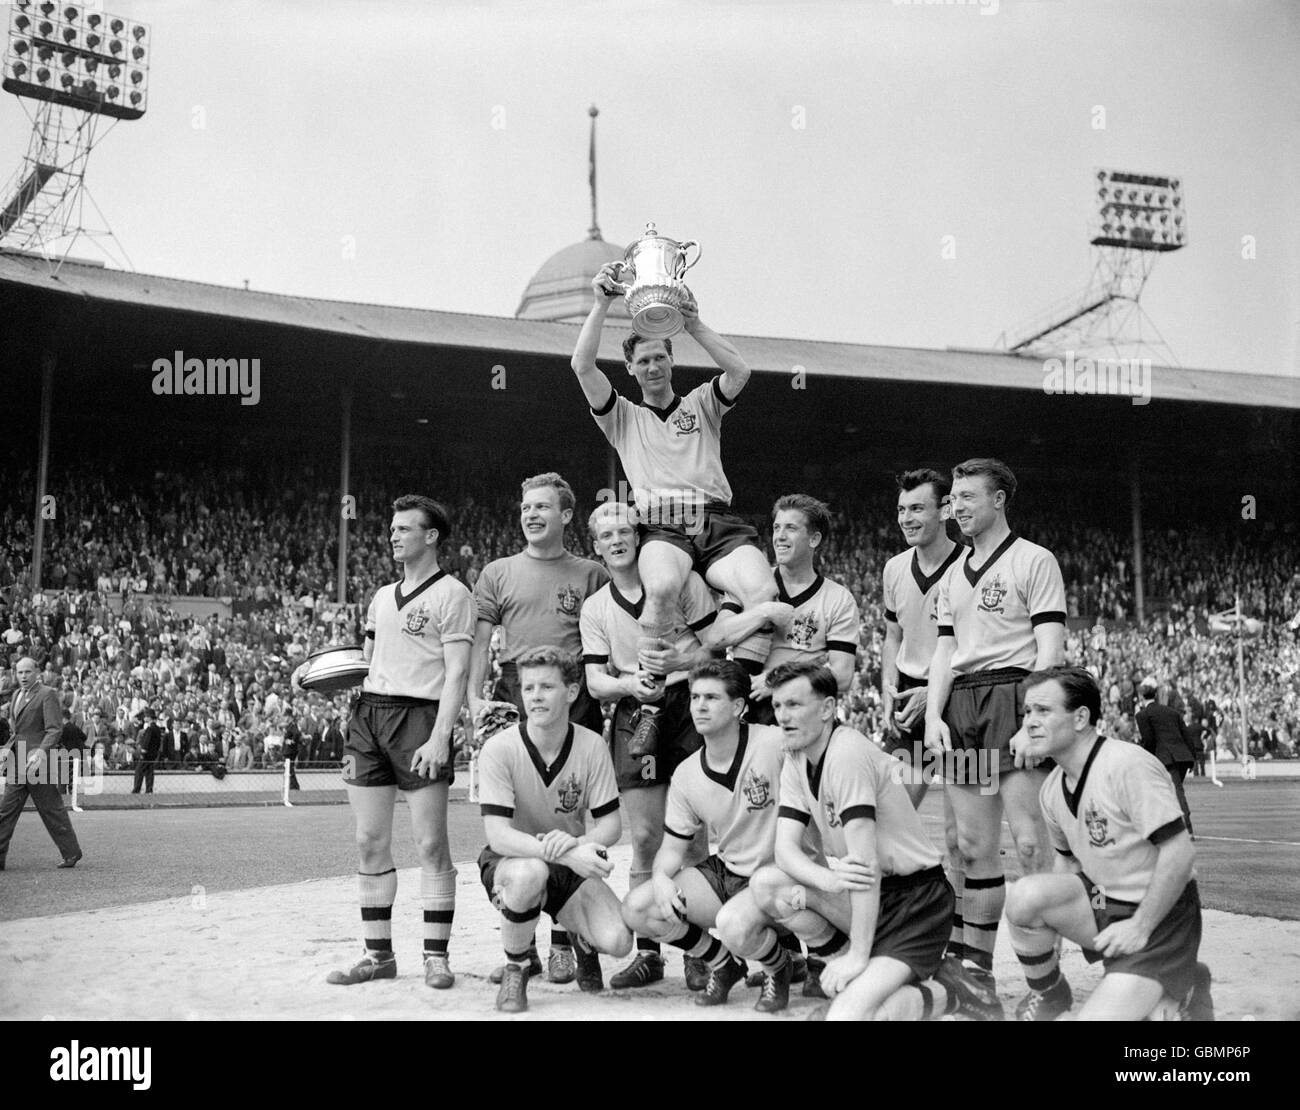 Wolverhampton Wanderers captain Bill Slater holds the FA Cup aloft as he is chaired by his jubilant teammates: (back row, l-r) Gerry Harris, Malcolm Finlayson, Ron Flowers, Peter Broadbent, Eddie Clamp, George Showell; (front row, l-r) Barry Stobart, Des Horne, Jimmy Murray, Norman Deeley Stock Photo